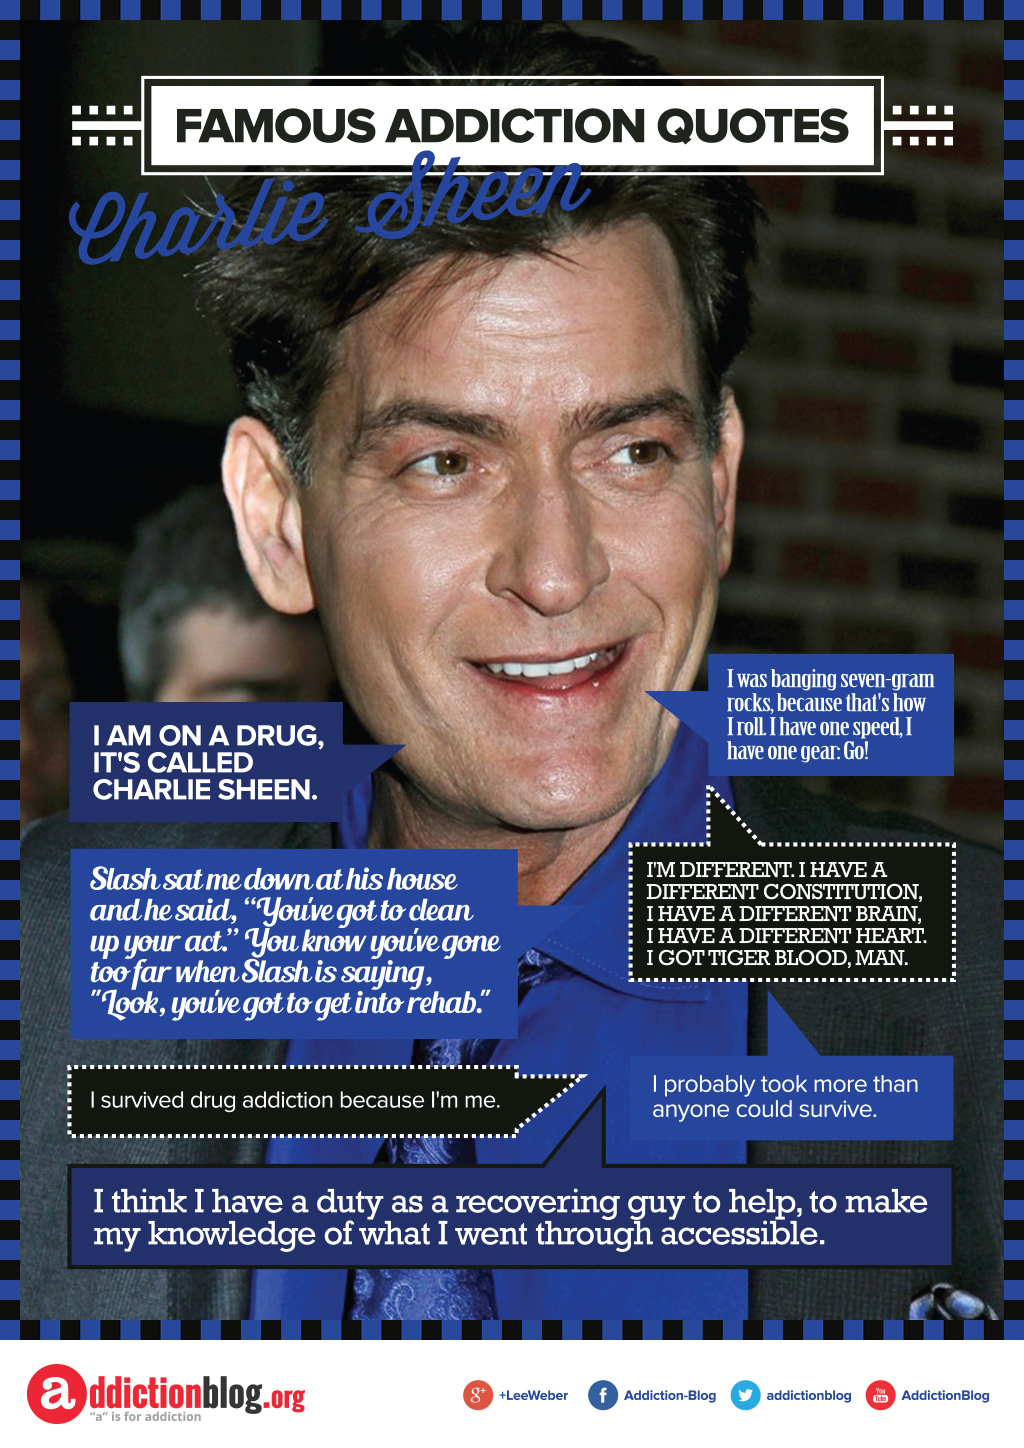 Charlie Sheen quotes on drugs and alcohol (INFOGRAPHIC)